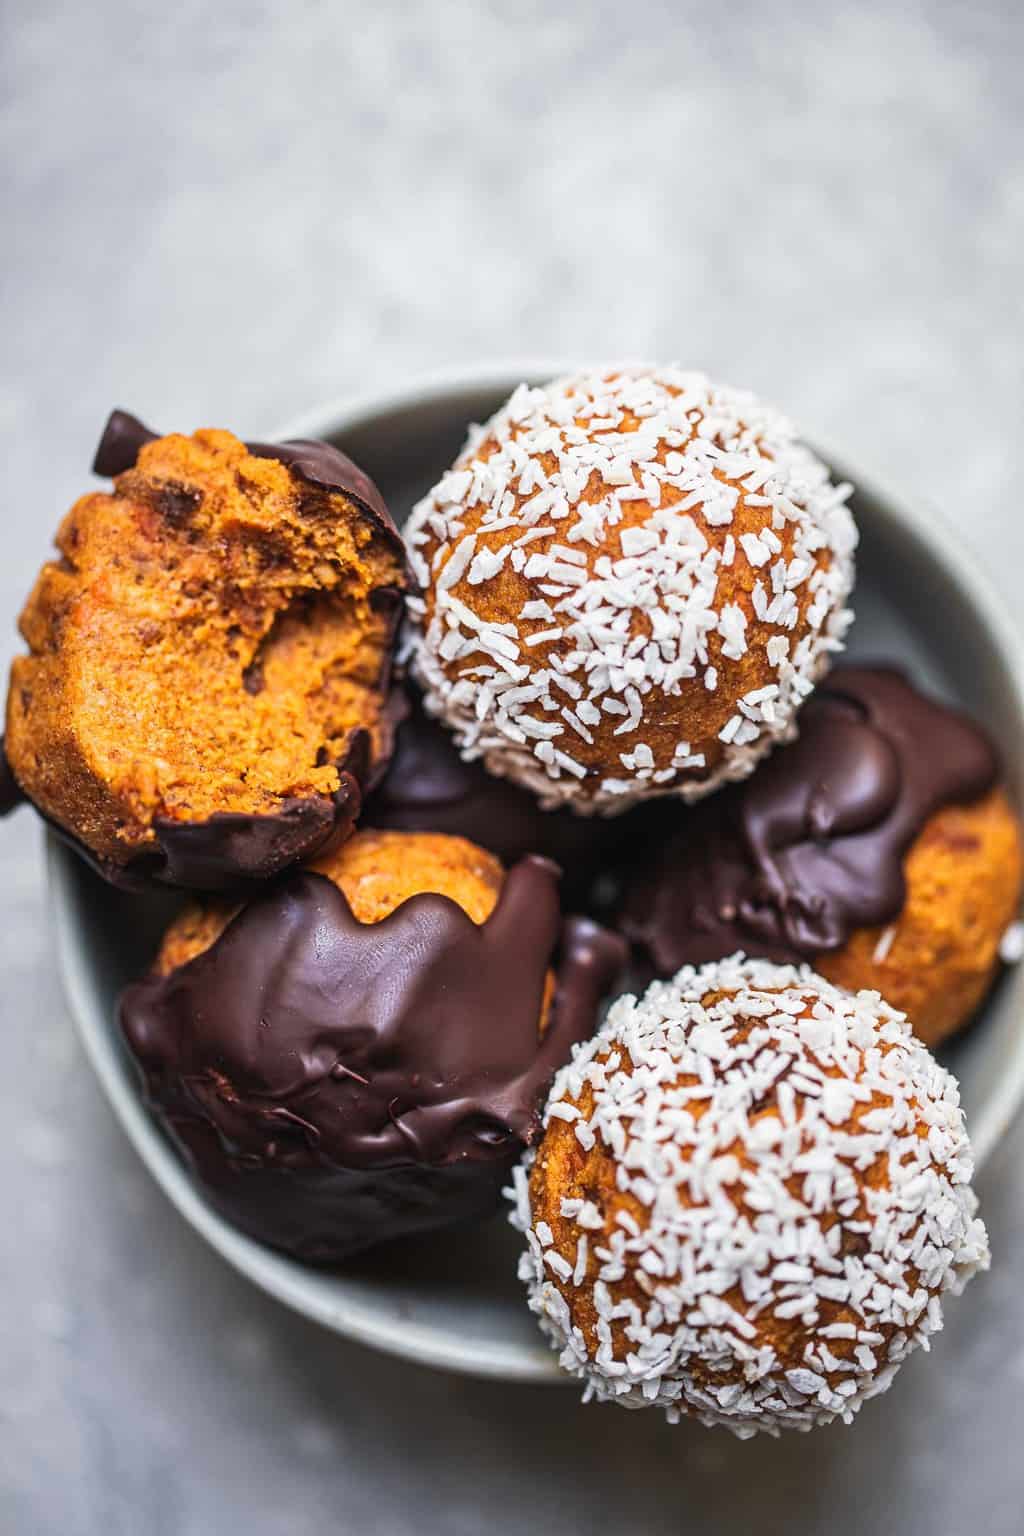 Vegan carrot bites with chocolate and coconut